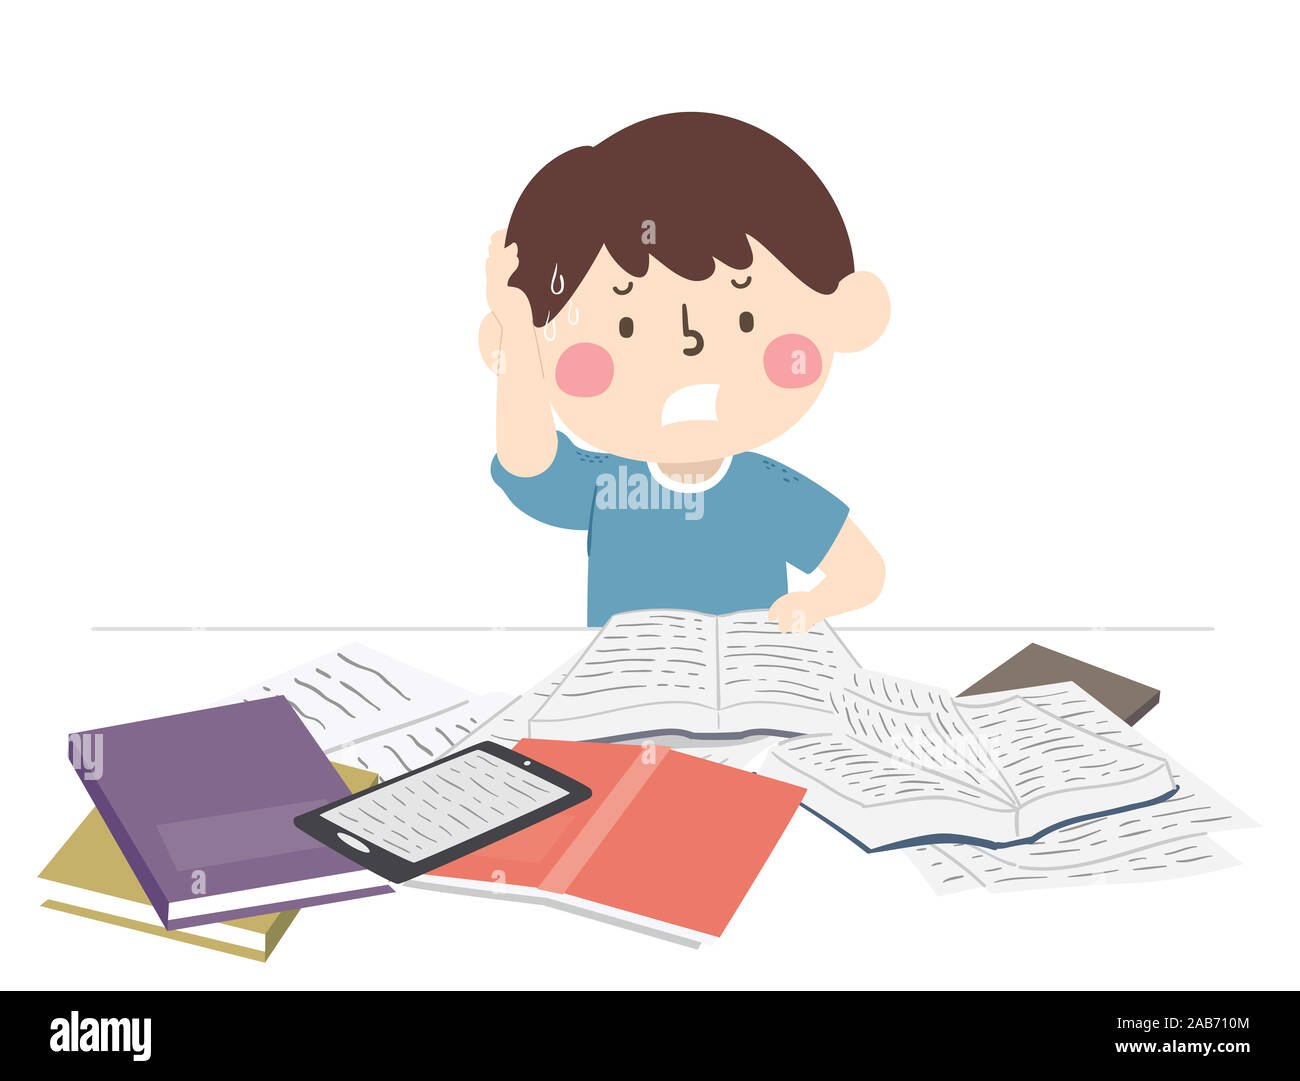 Illustration of a Kid Boy Scratching His Head and Cramming to Study for Exam, with Open Books and Tablet on His Table Stock Photo